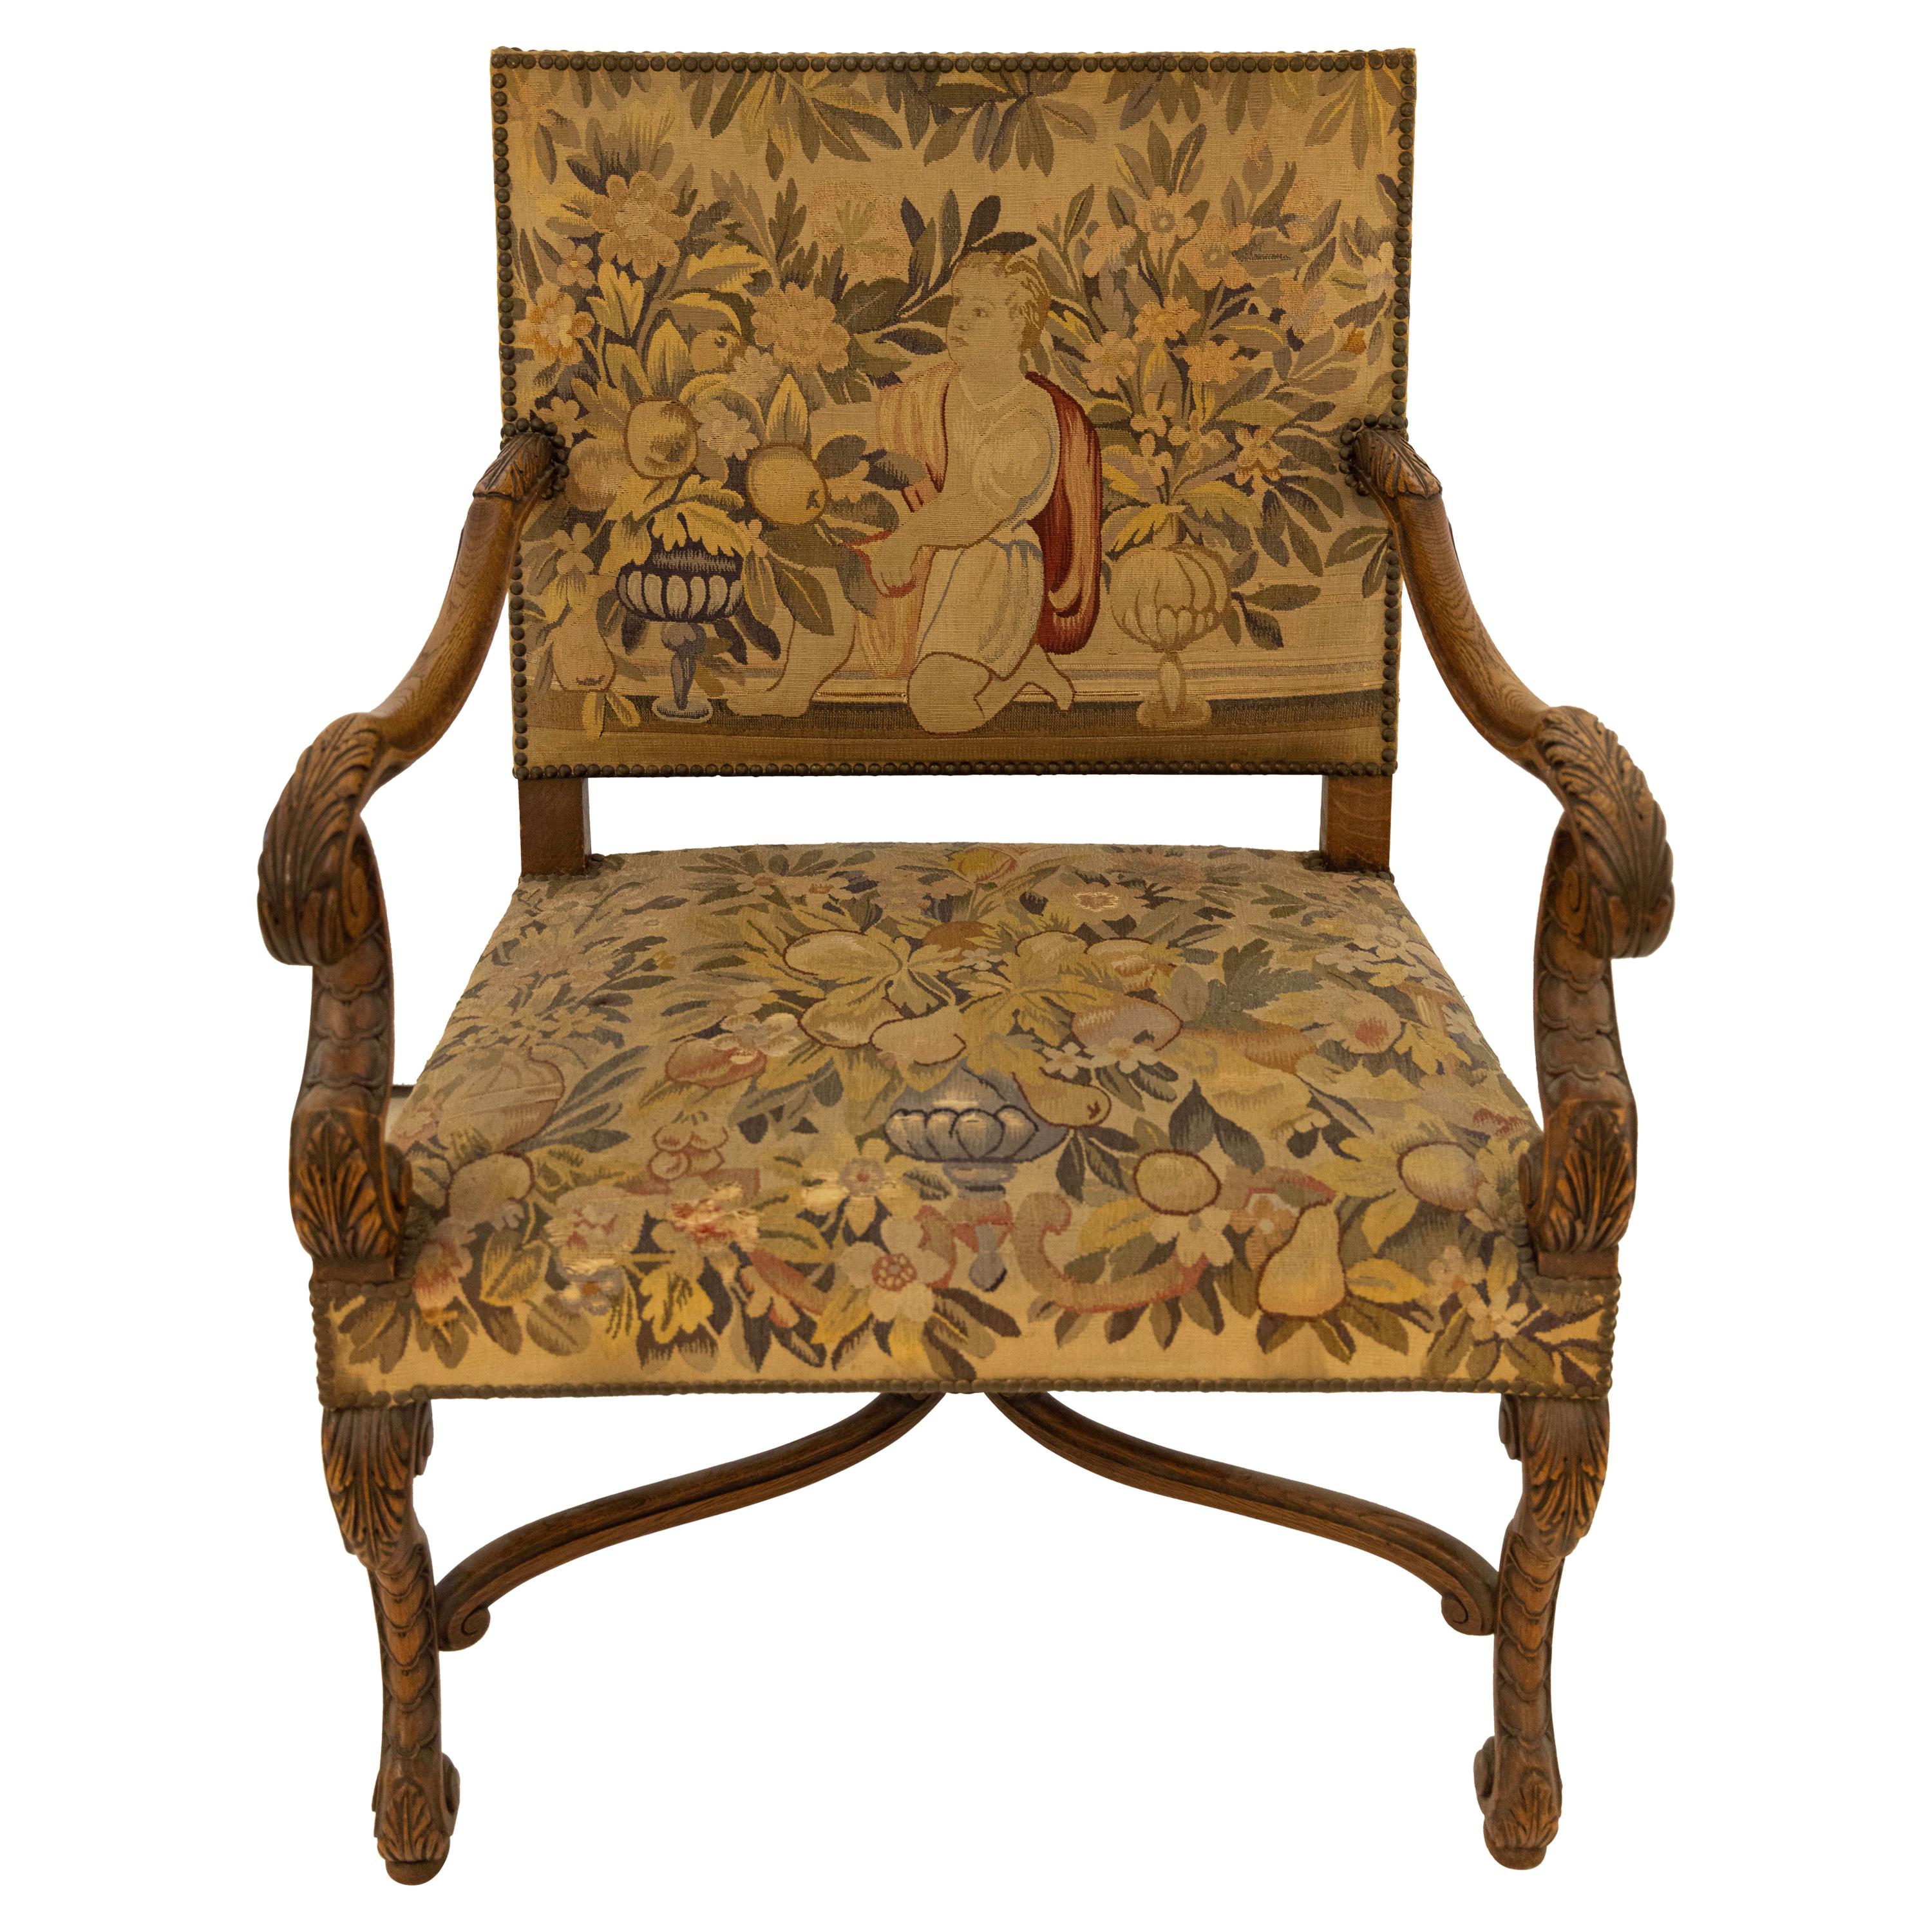 French Tapestry Chair Antique, c. 1700s